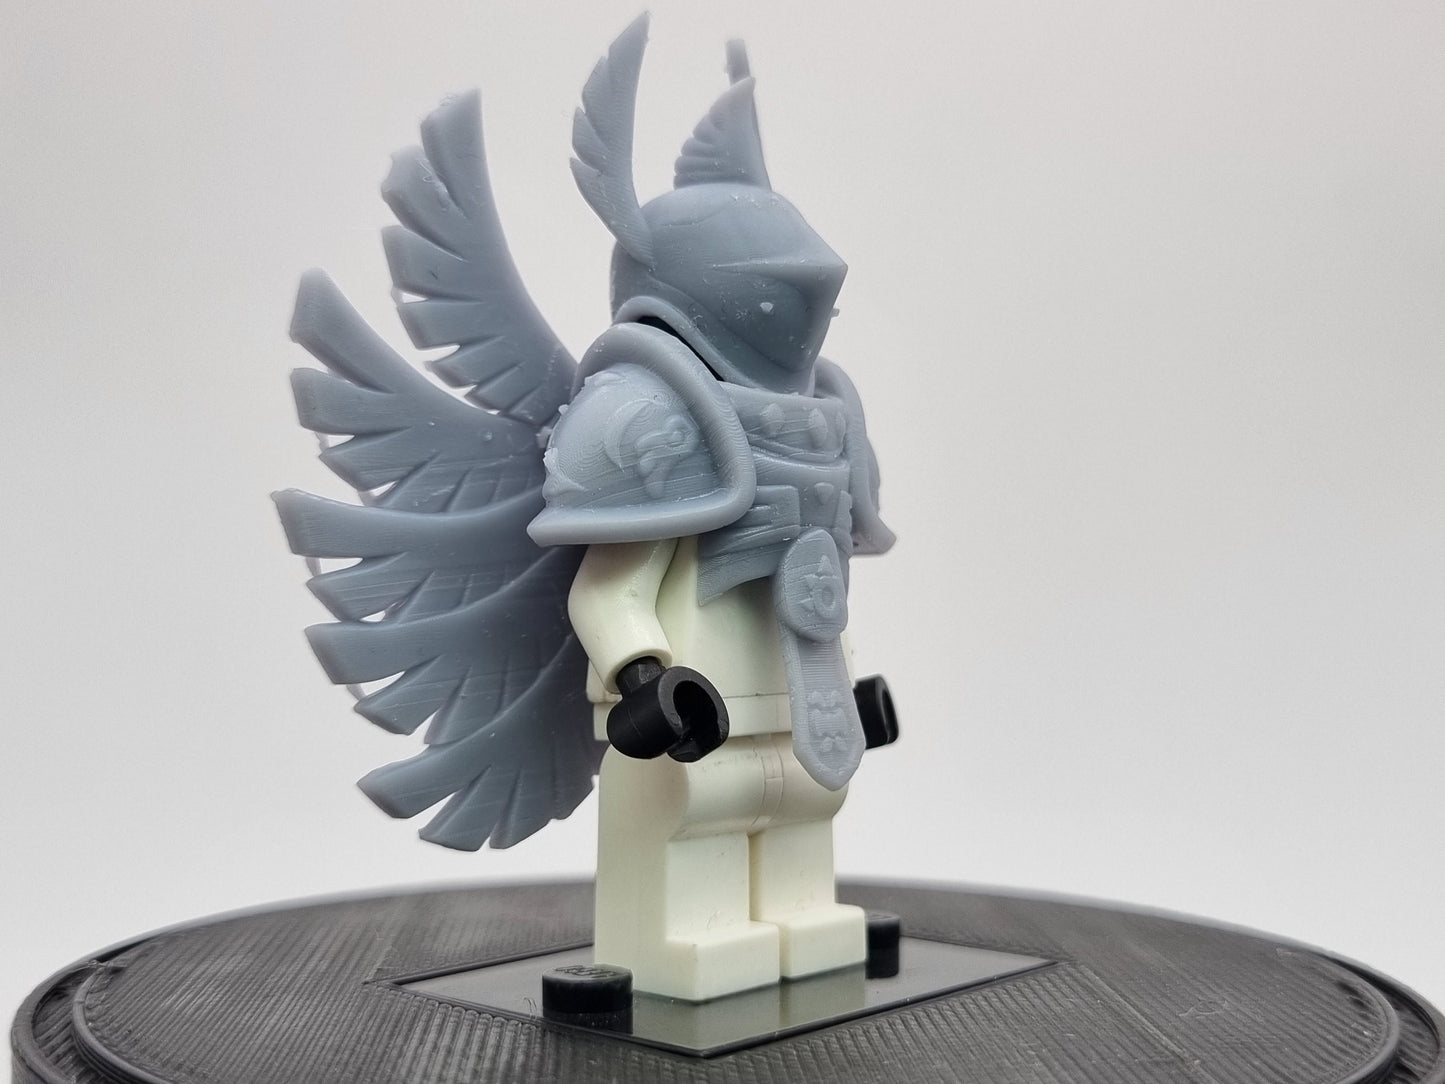 Building toy custom 3D printed winged warrior!